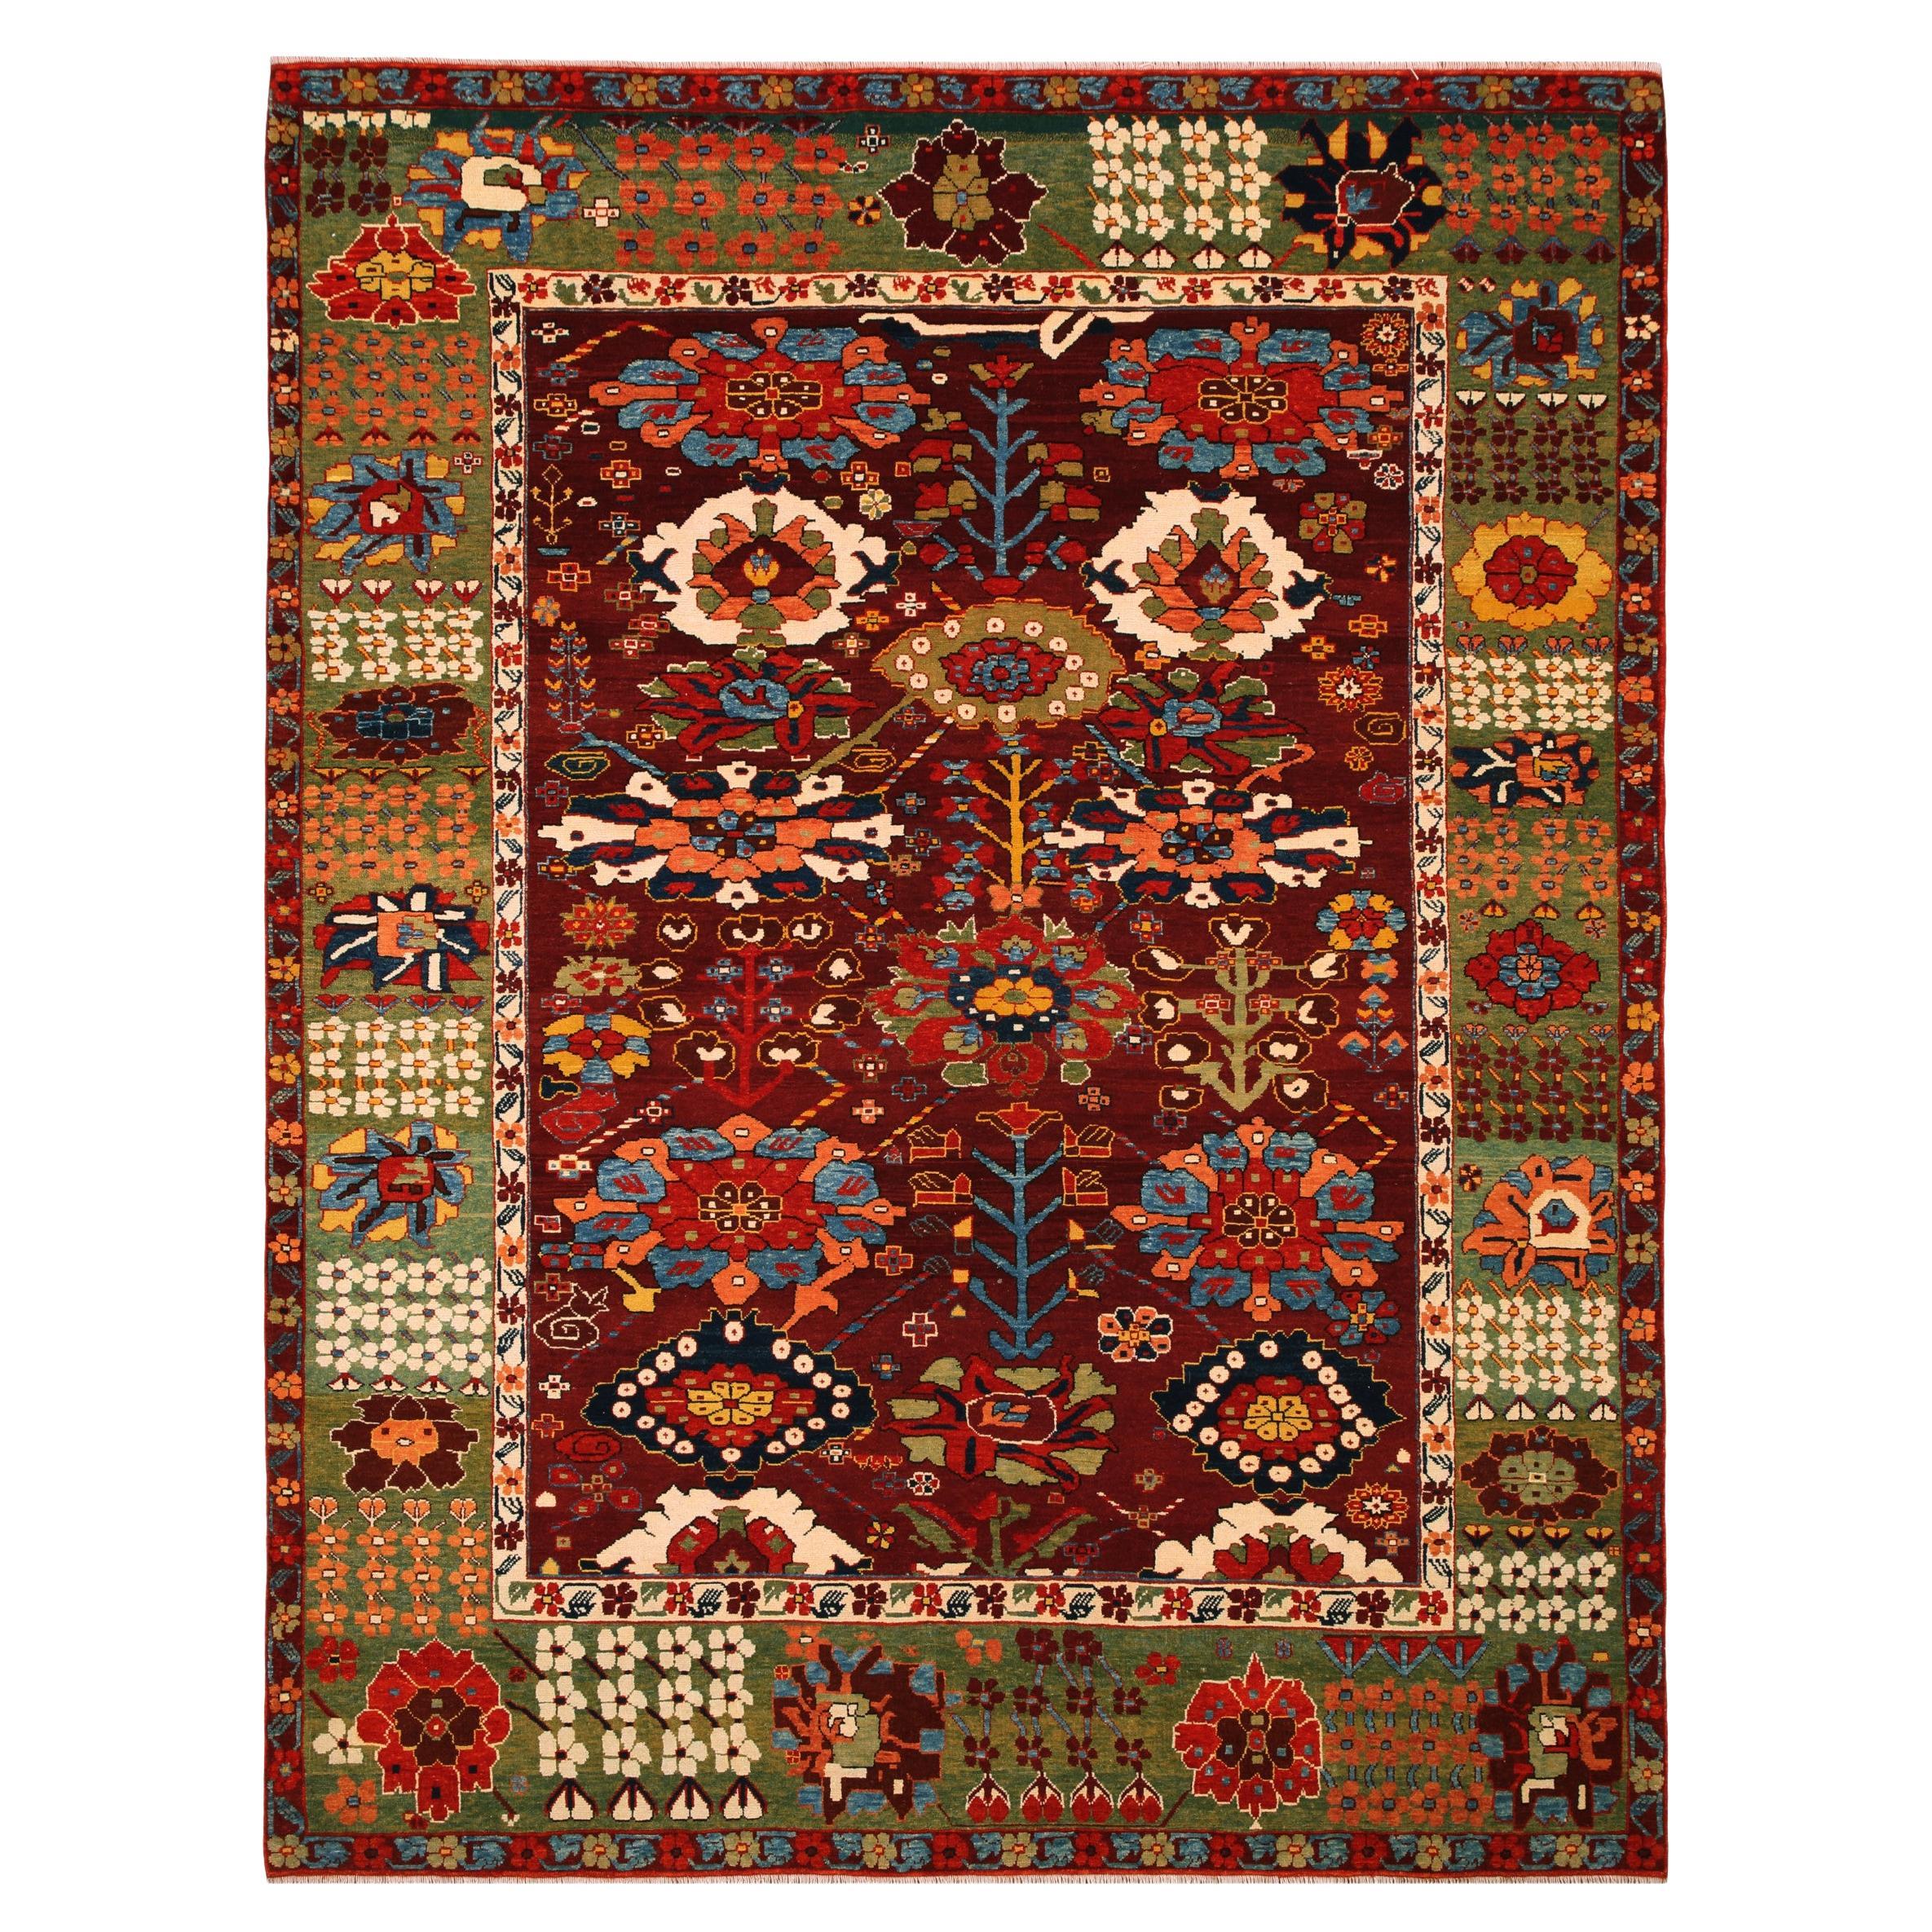 Ararat Rugs Trees and Palmettes Rug Saluj Bulagh Revival Carpet Natural Dyed For Sale